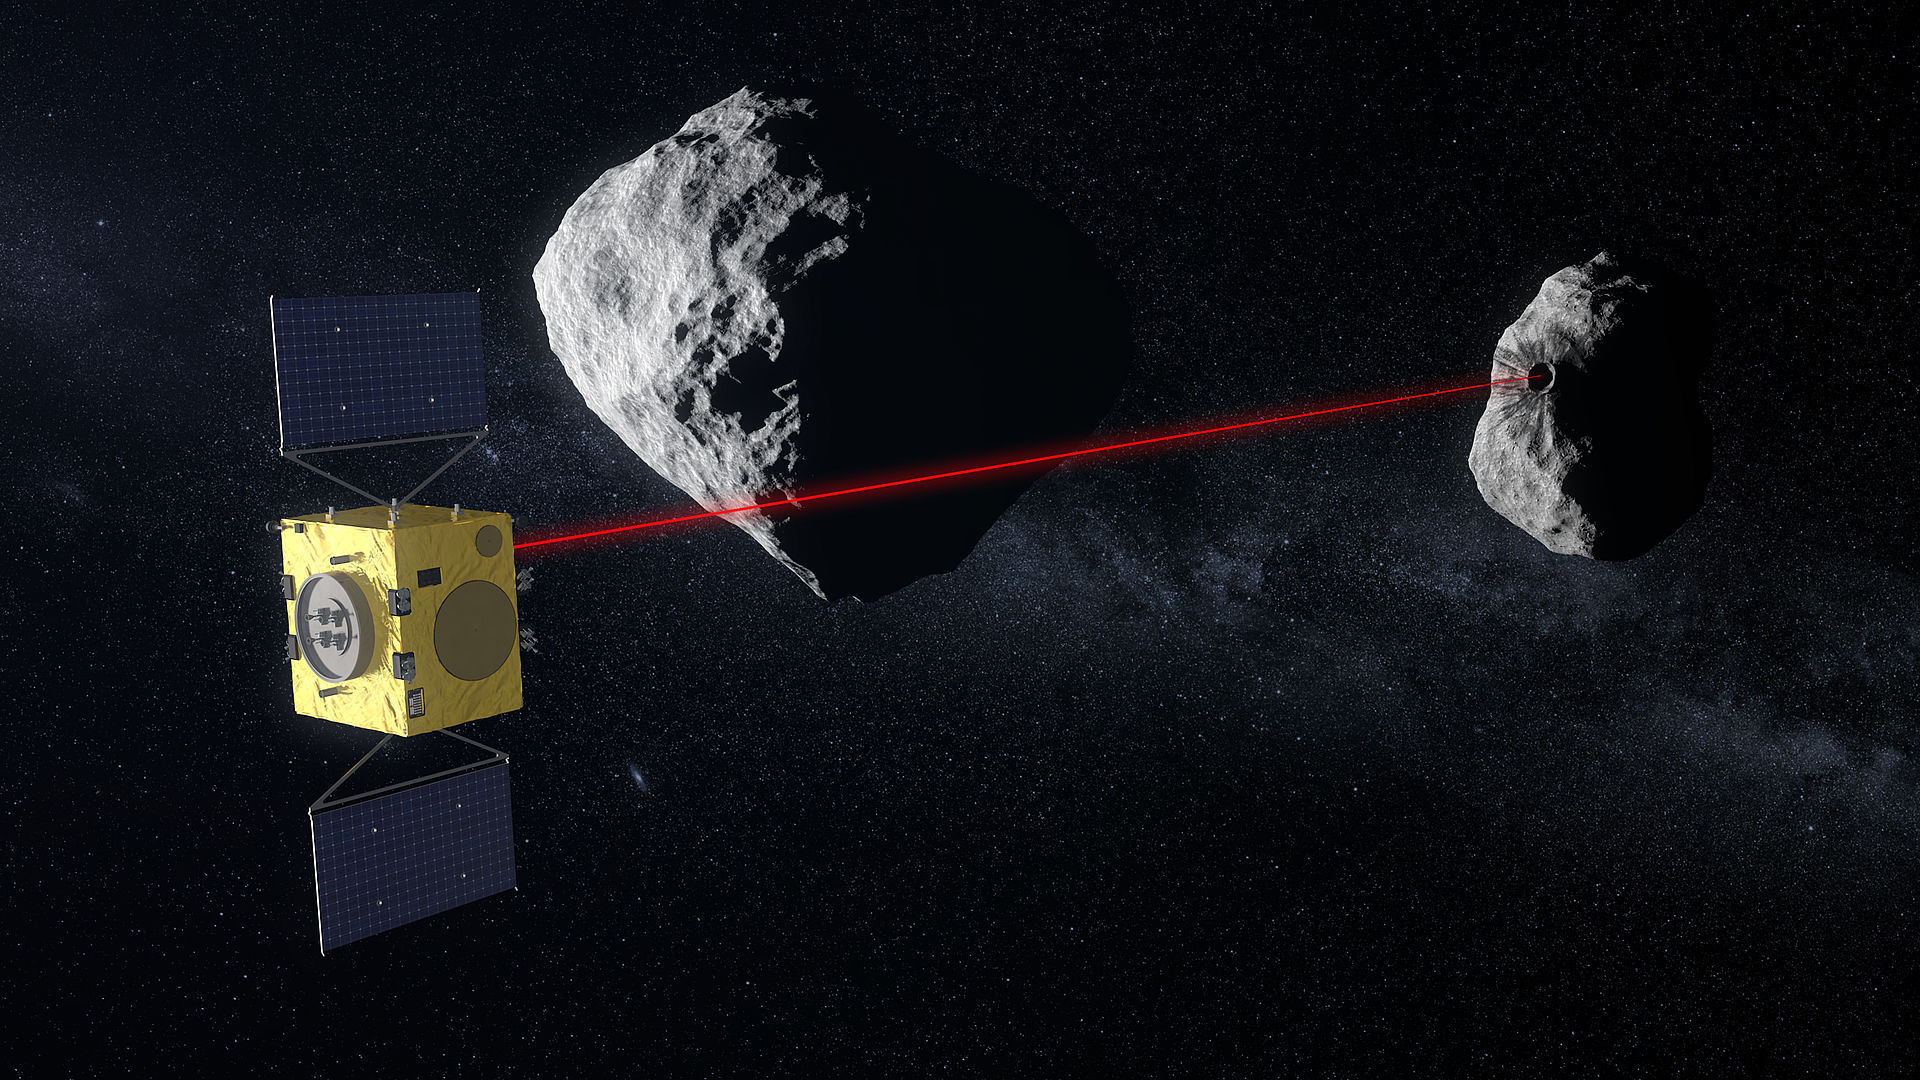 HERA HERA spacecraft scanning an asteroid in a close proximity